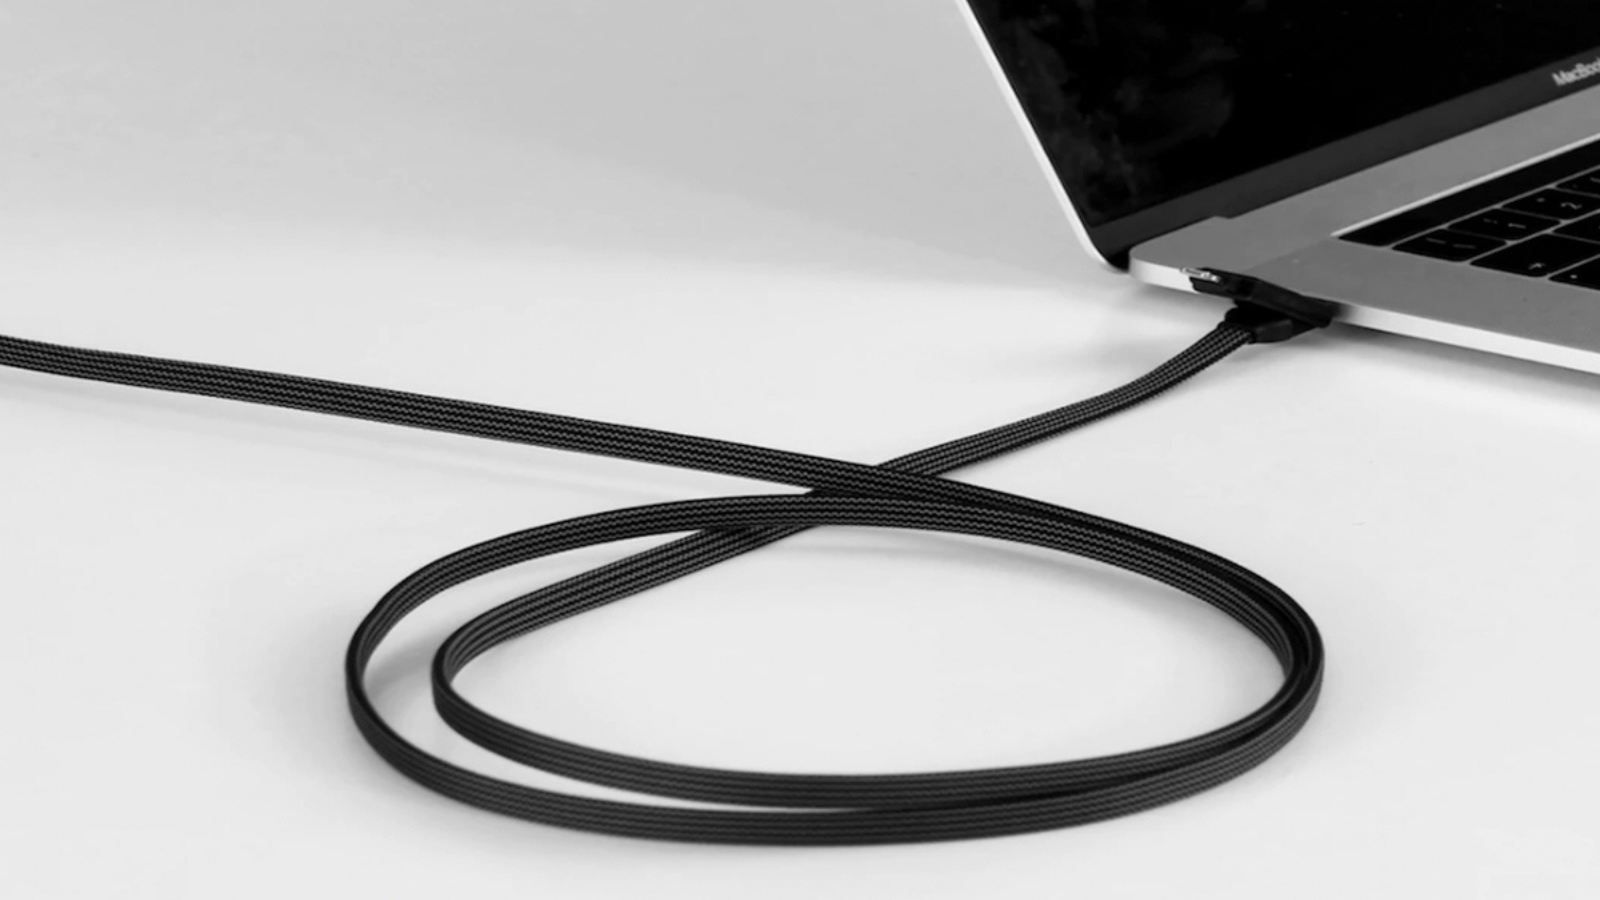 laptop with incharge x max charging cable connected